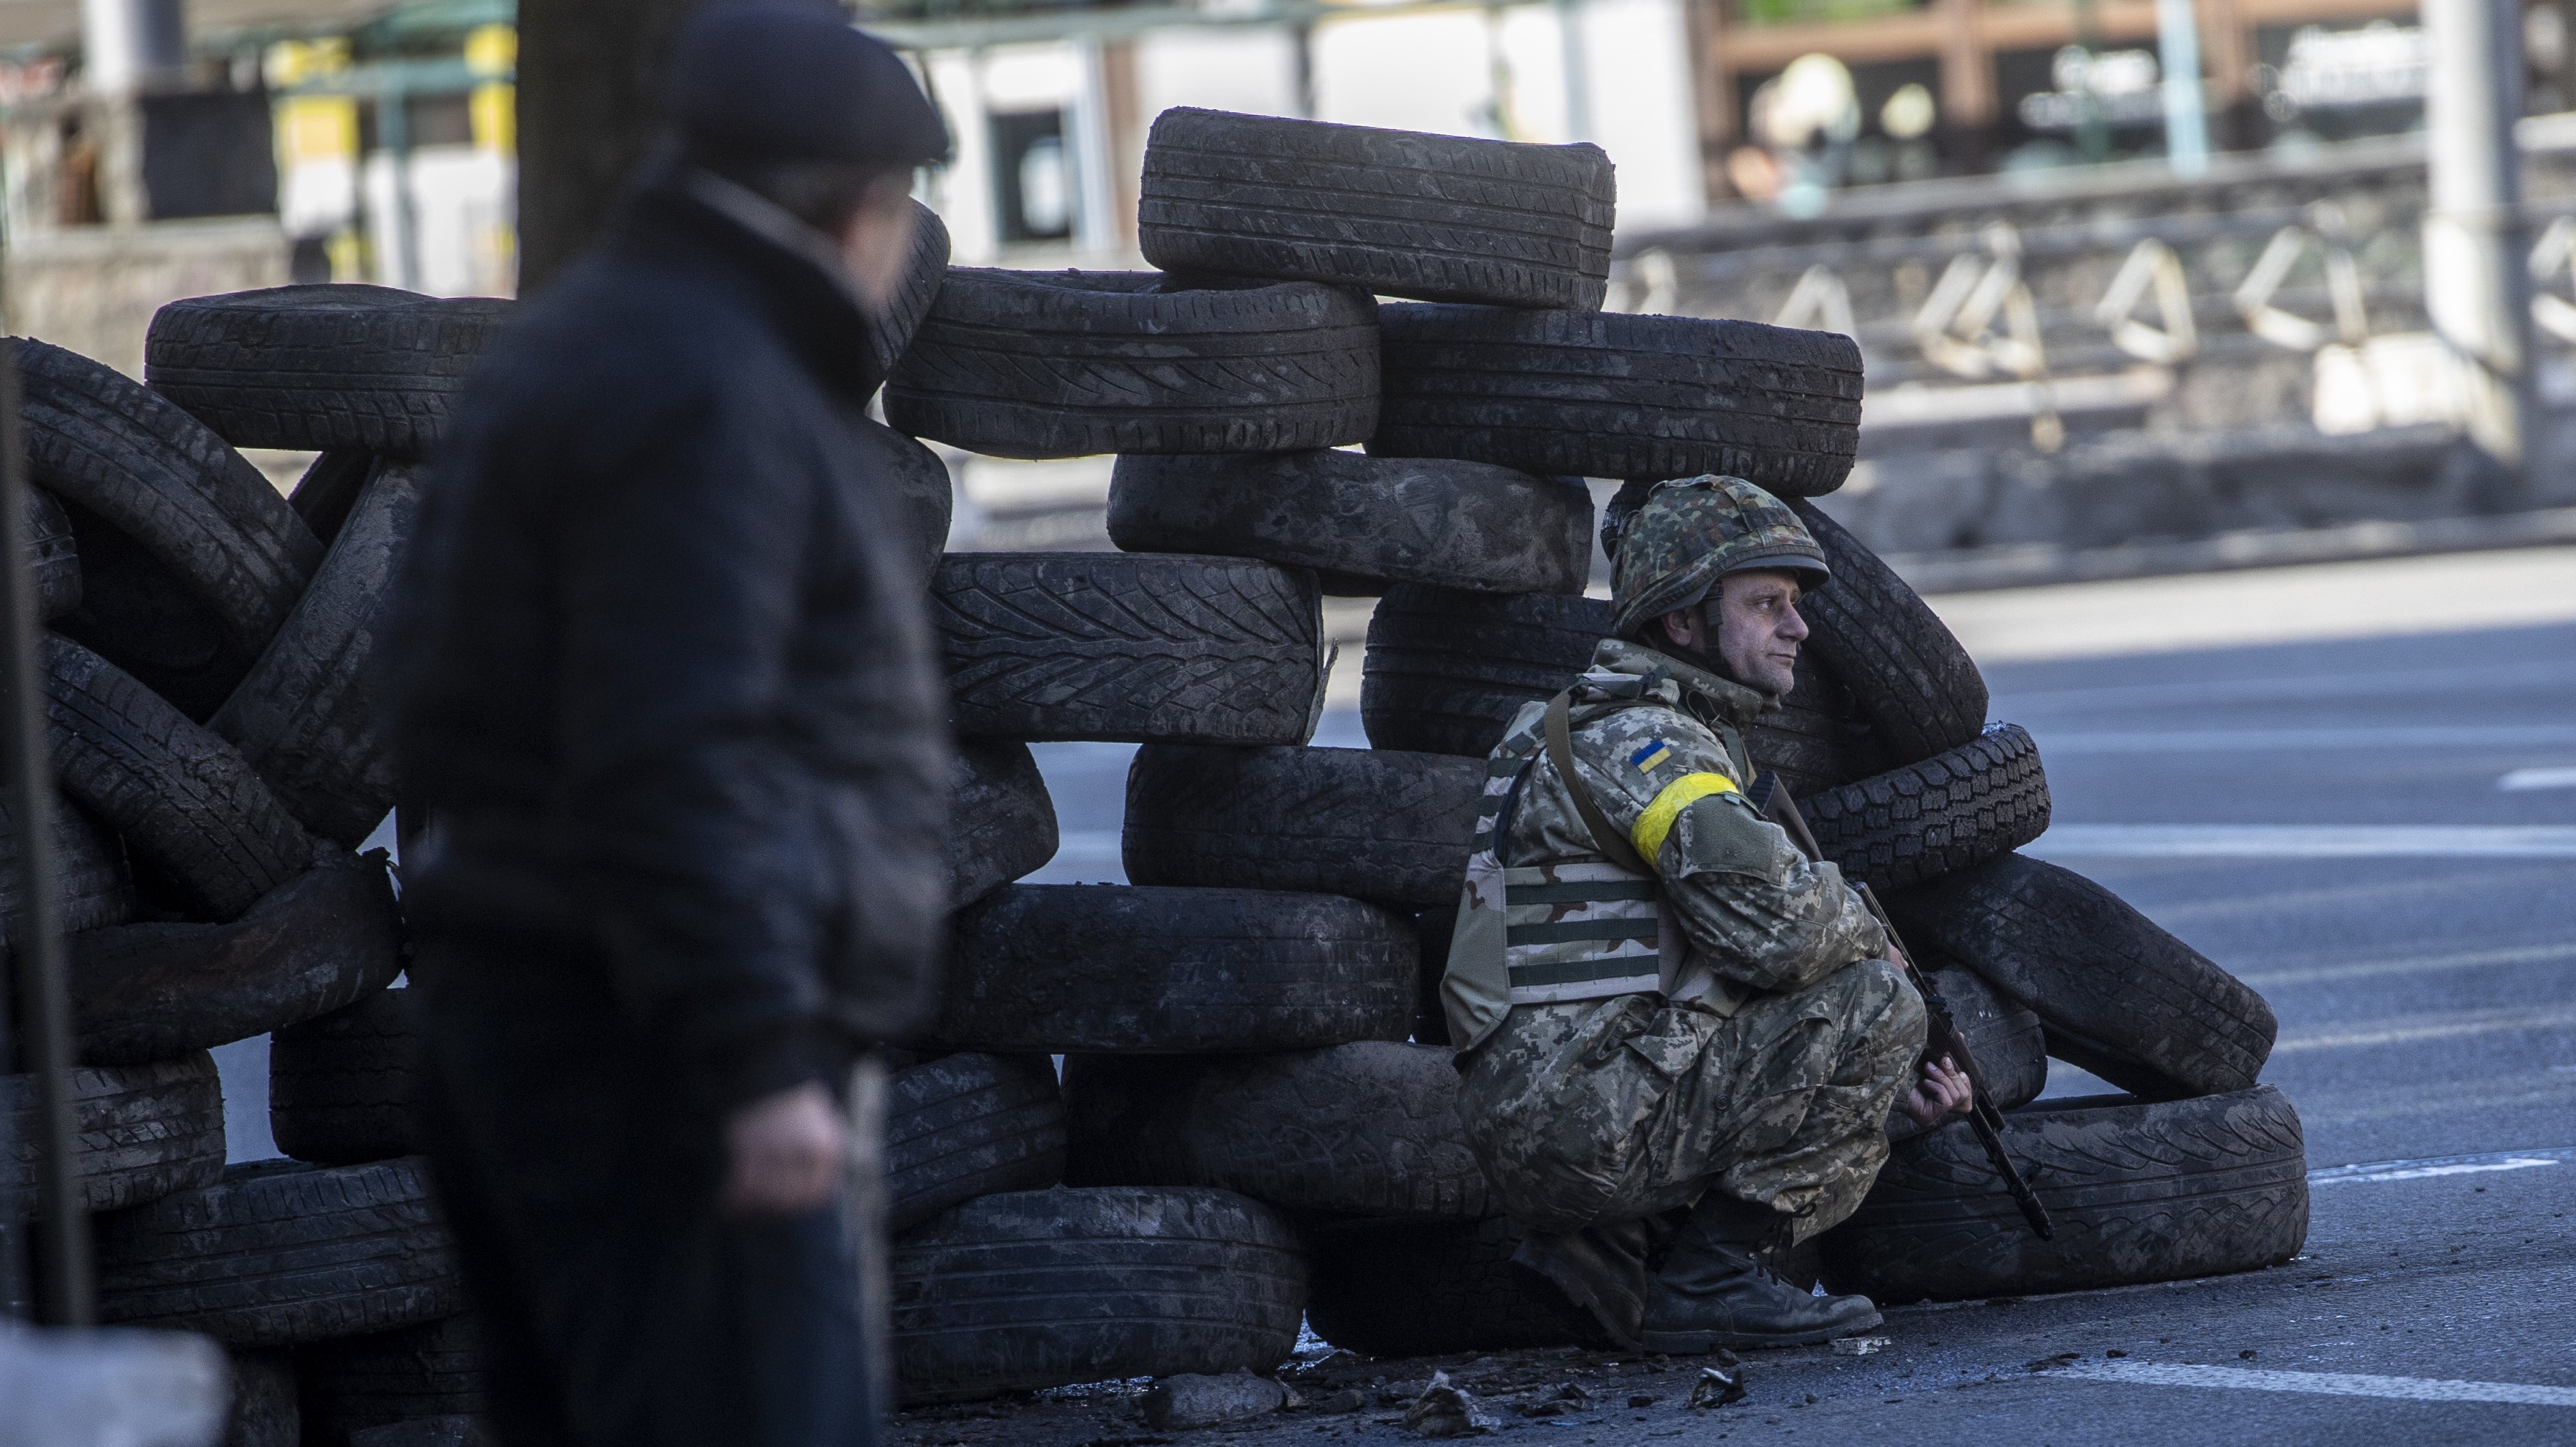 Russiaâs military intervention in Ukraine continues